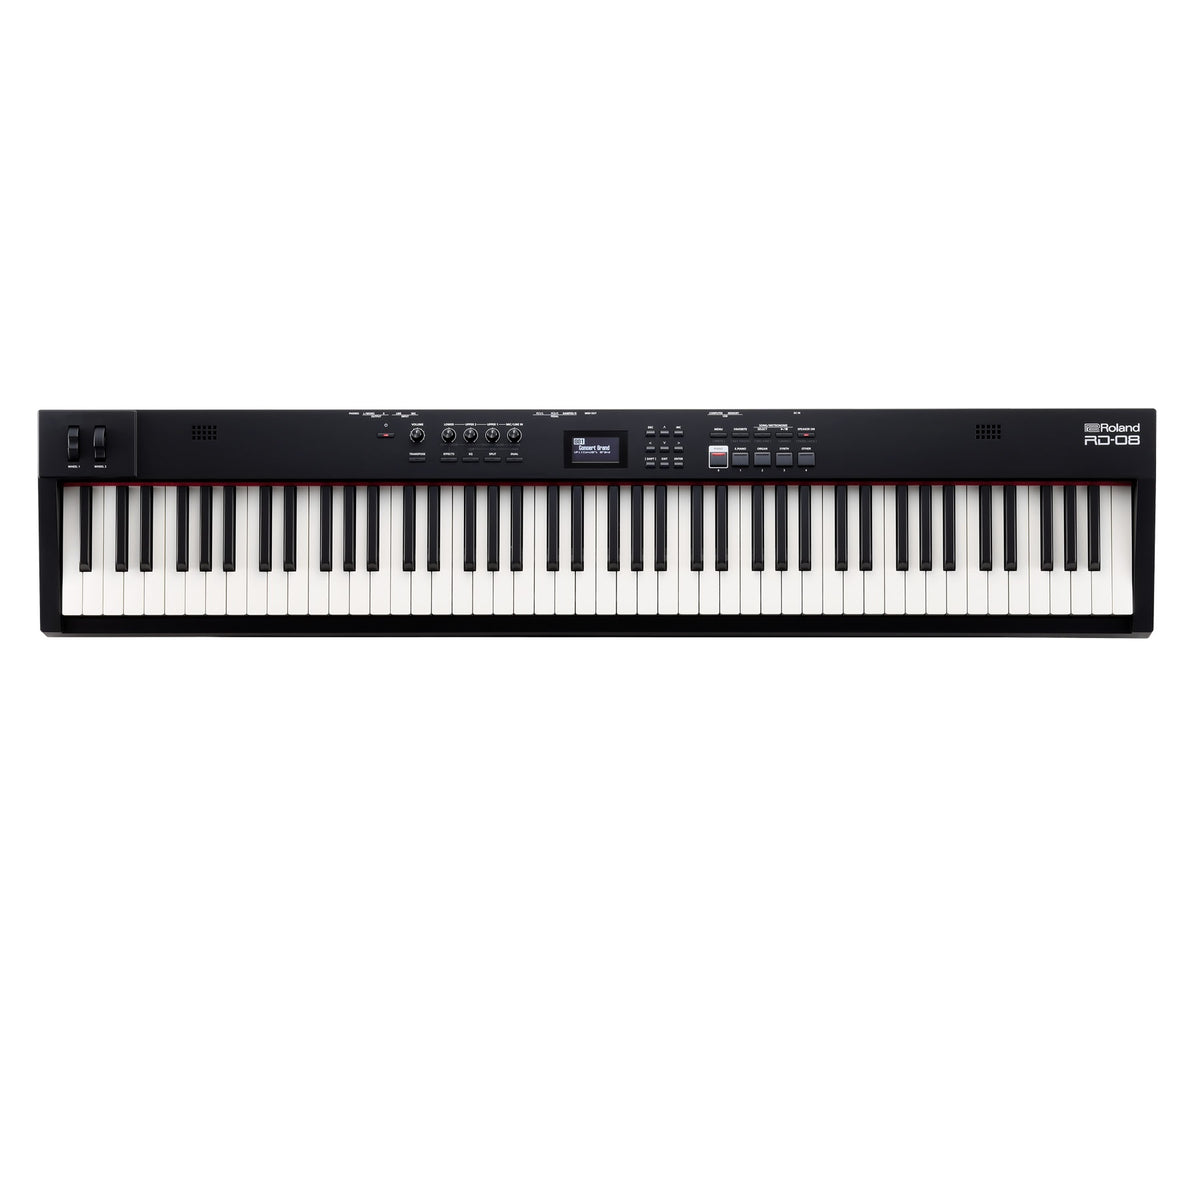 Roland 88-key Stage Piano with PHA-4 Hammer-action Keys | Musical Instruments | Musical Instruments, Musical Instruments. Musical Instruments: Digital Piano, Musical Instruments. Musical Instruments: Keyboard & Synthesizer, Musical Instruments. Musical Instruments: Piano & Keyboard | Roland